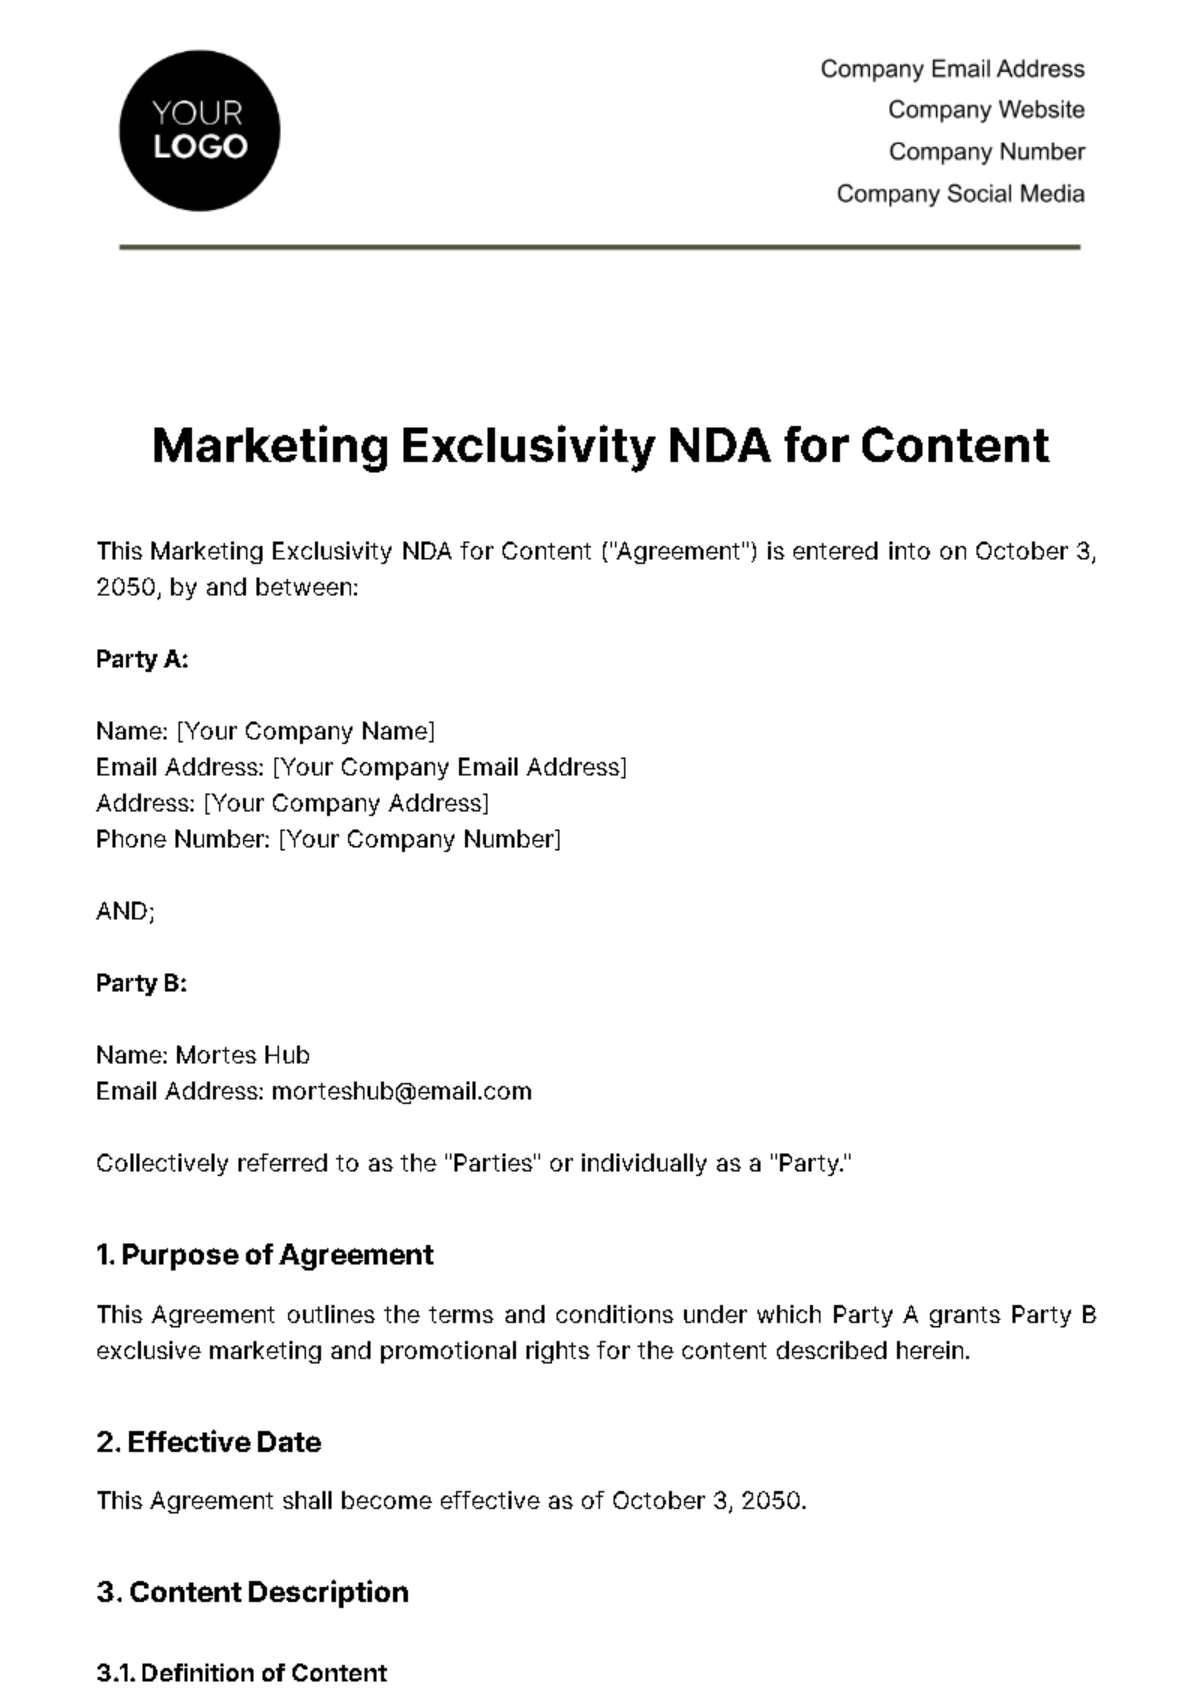 Free Marketing Exclusivity NDA for Content Template